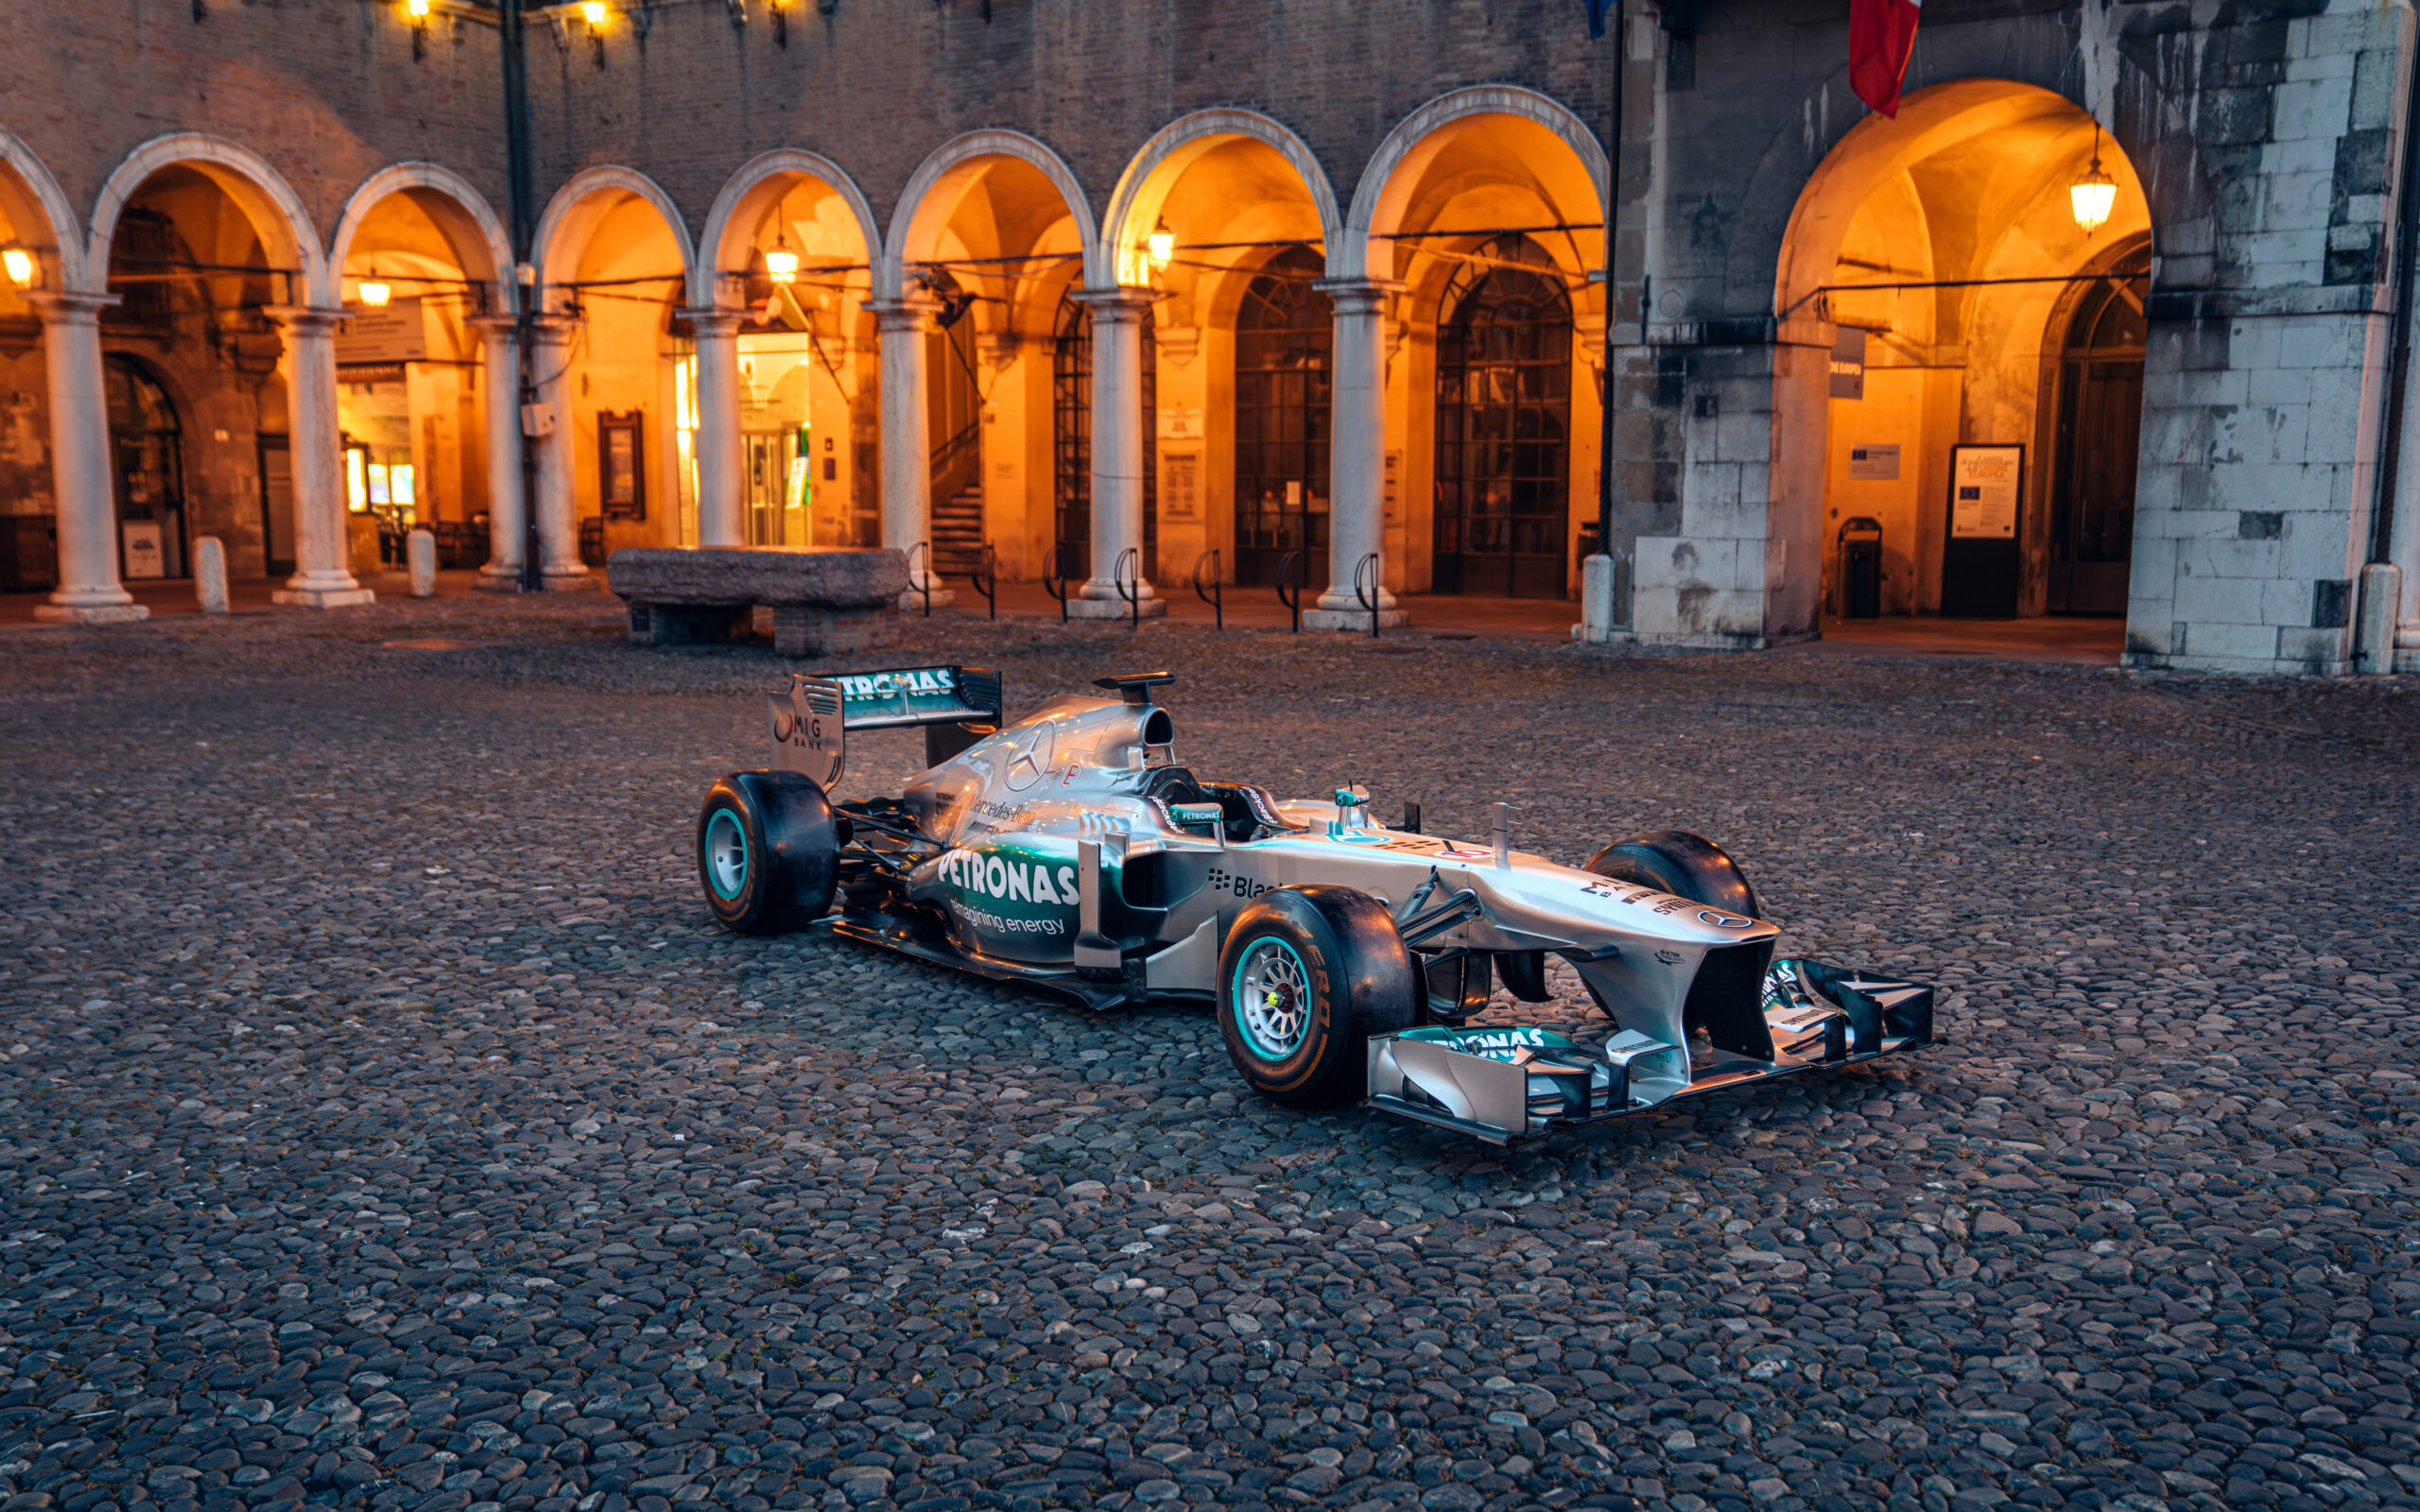 Sale of Lewis Hamilton’s first Mercedes F1 car sets new auction record